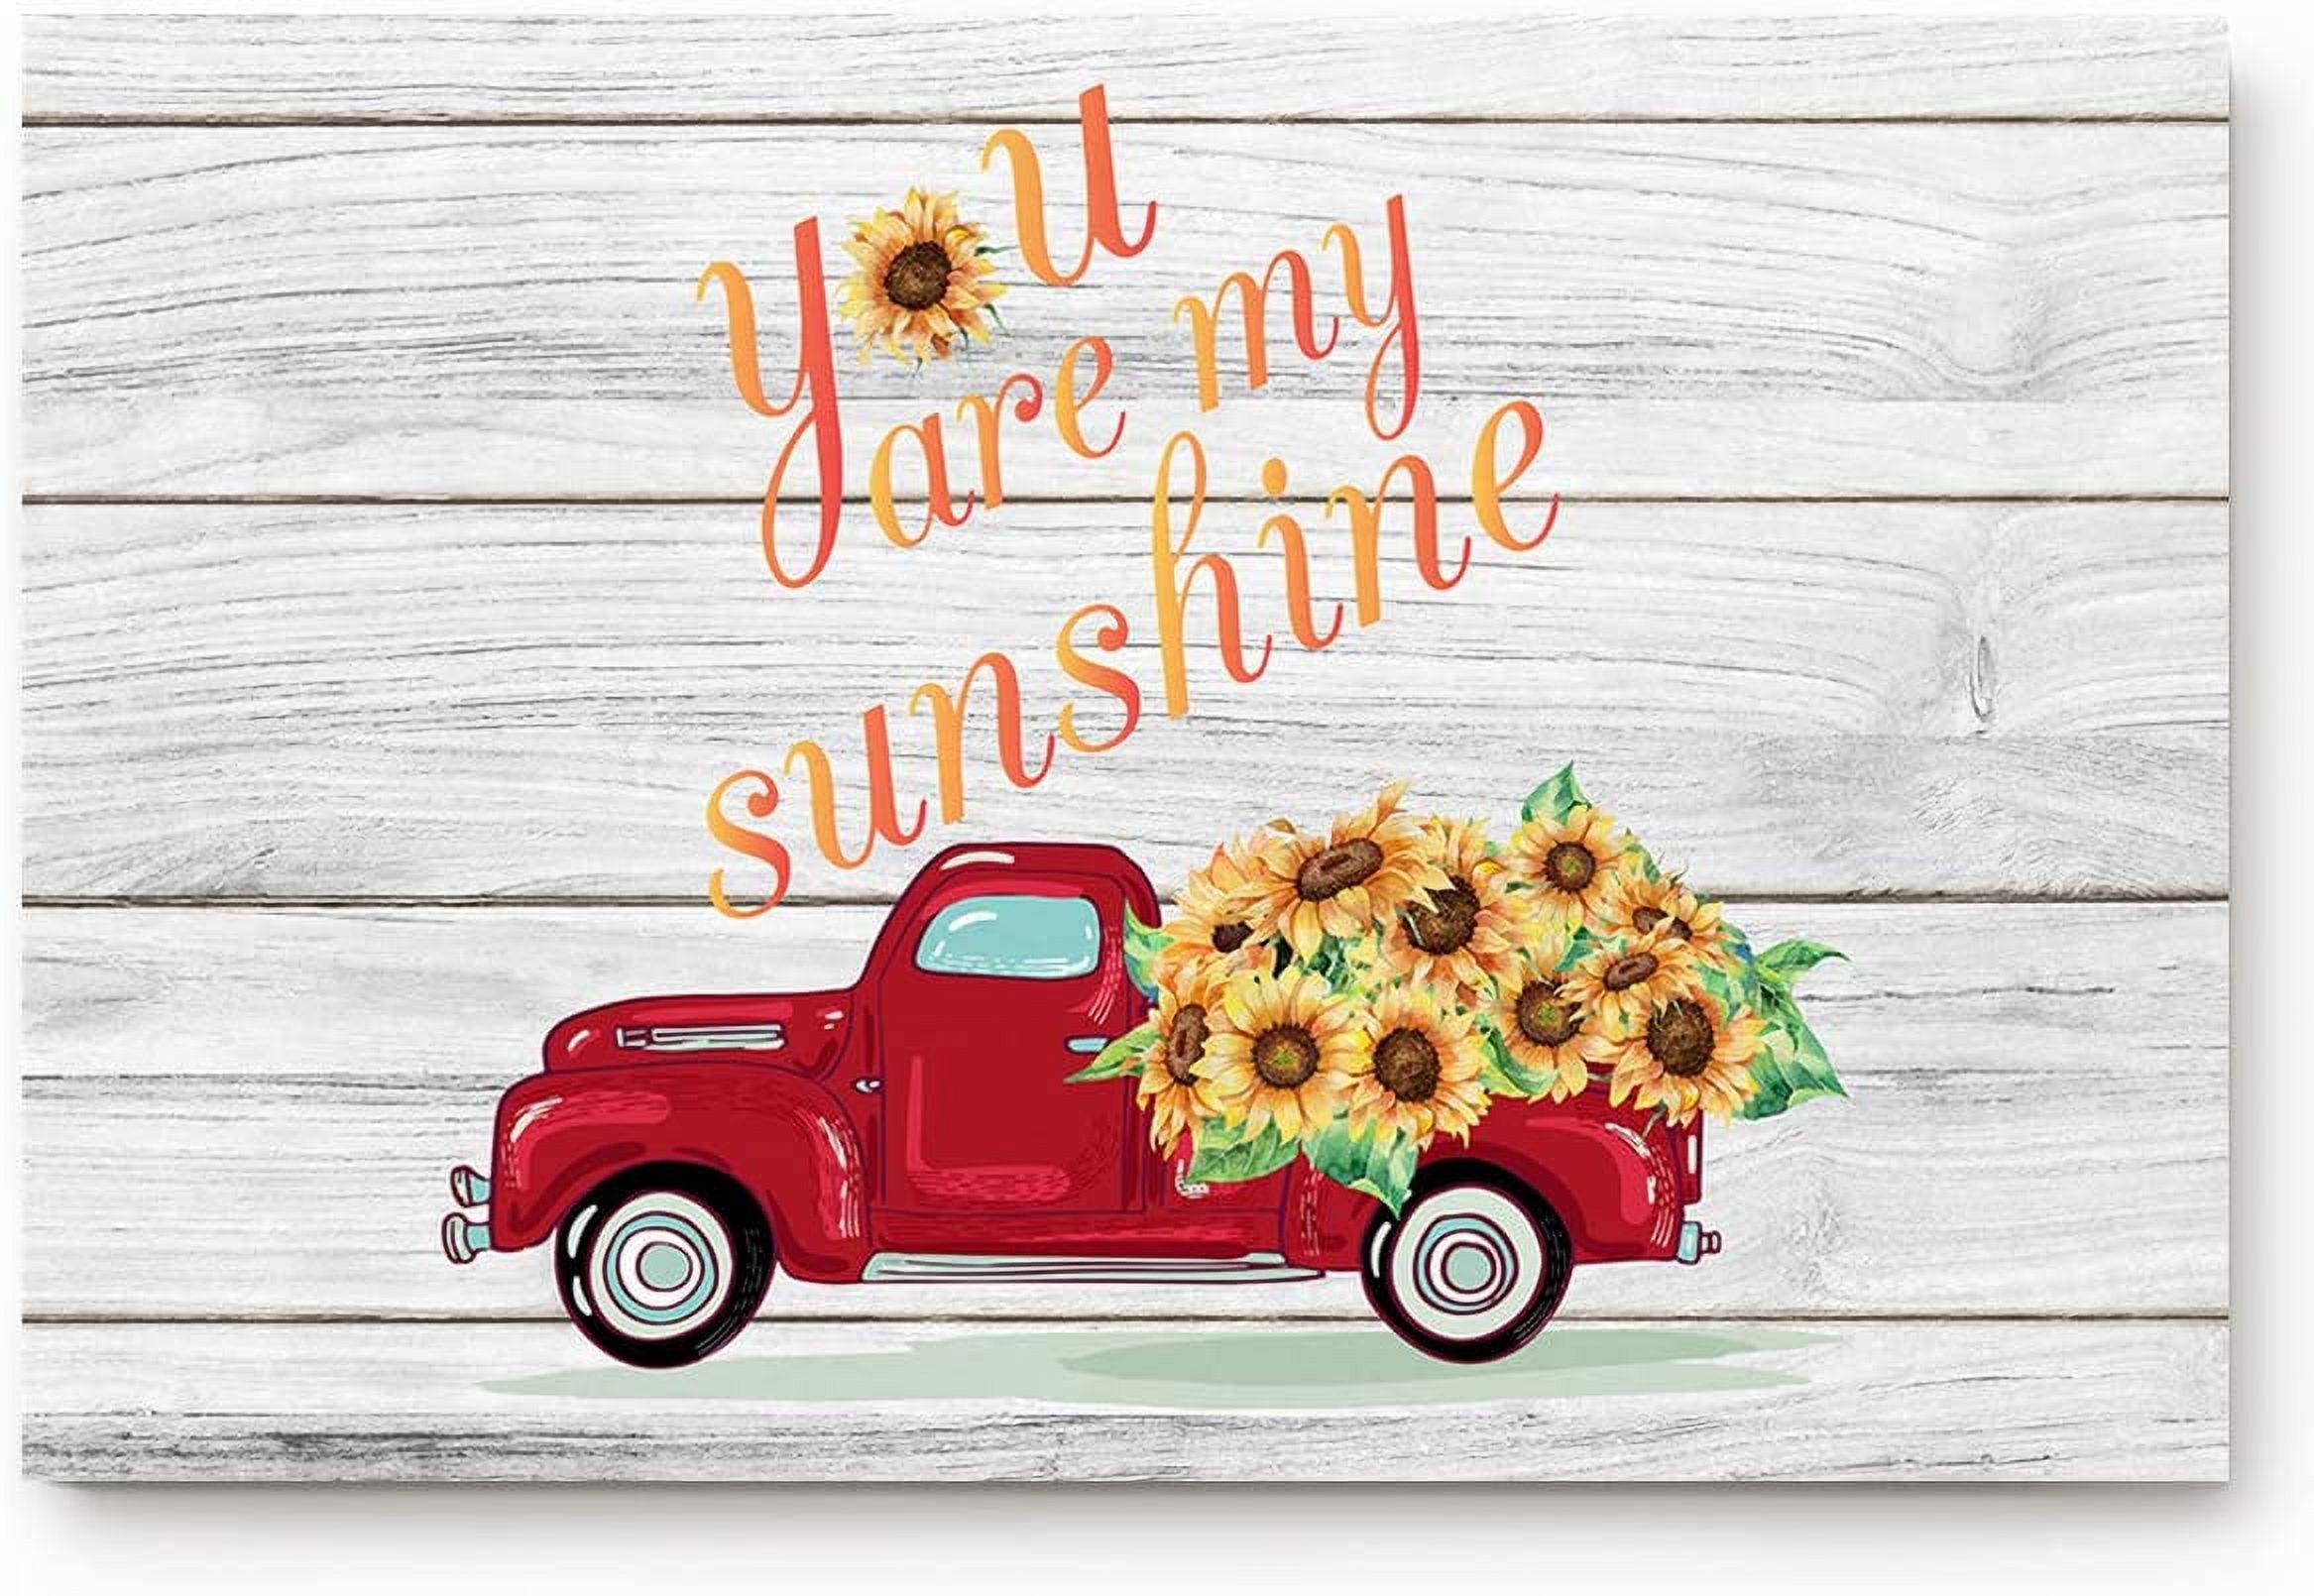 Valentine''s Day You are My Sunshine Doormat Welcome Mats Rugs Carpet Outdoor/Indoor for Home/Office/Bedroom,23.6(L) X 15.7(W),Red Truck Car with Sunflowers - image 1 of 6